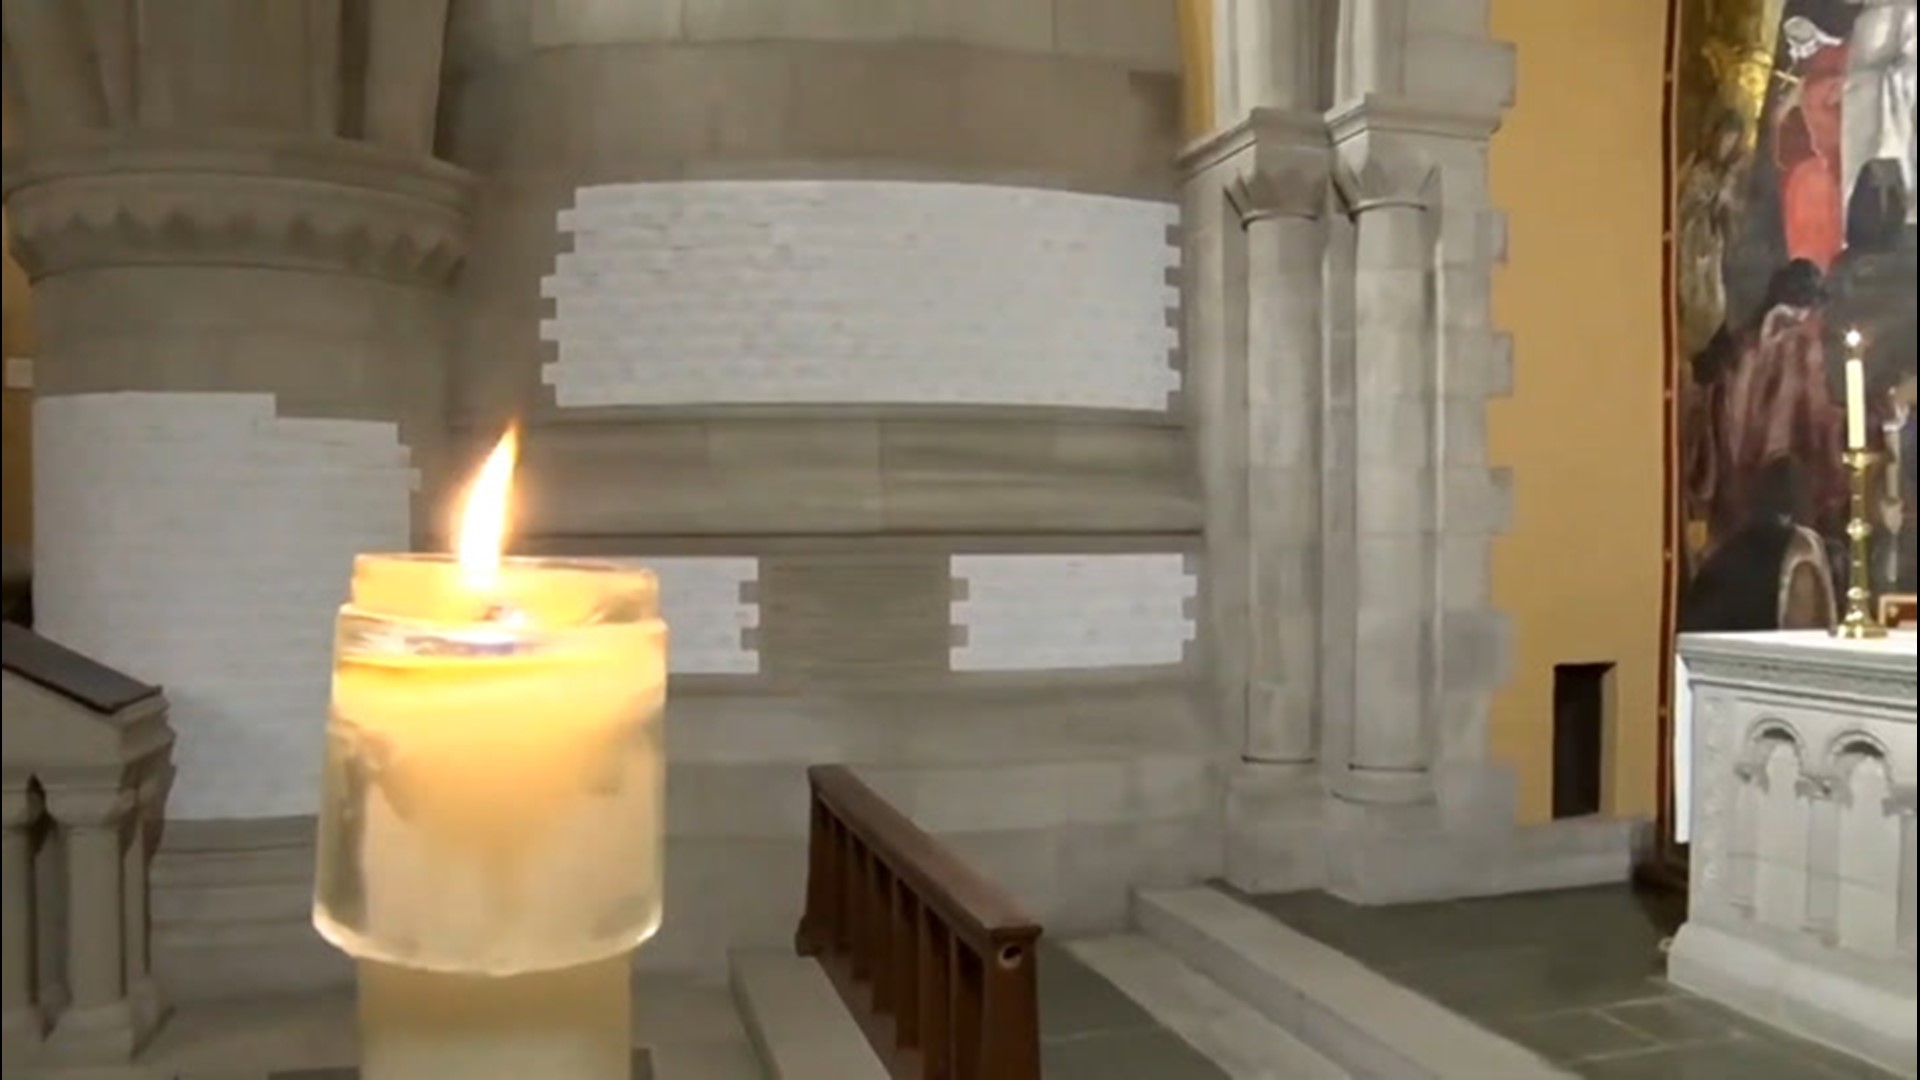 The Washington National Cathedral livestreamed its funeral bell ringing 500 times on Feb. 22, in honor of the 500,000 Americans who have died of COVID-19.